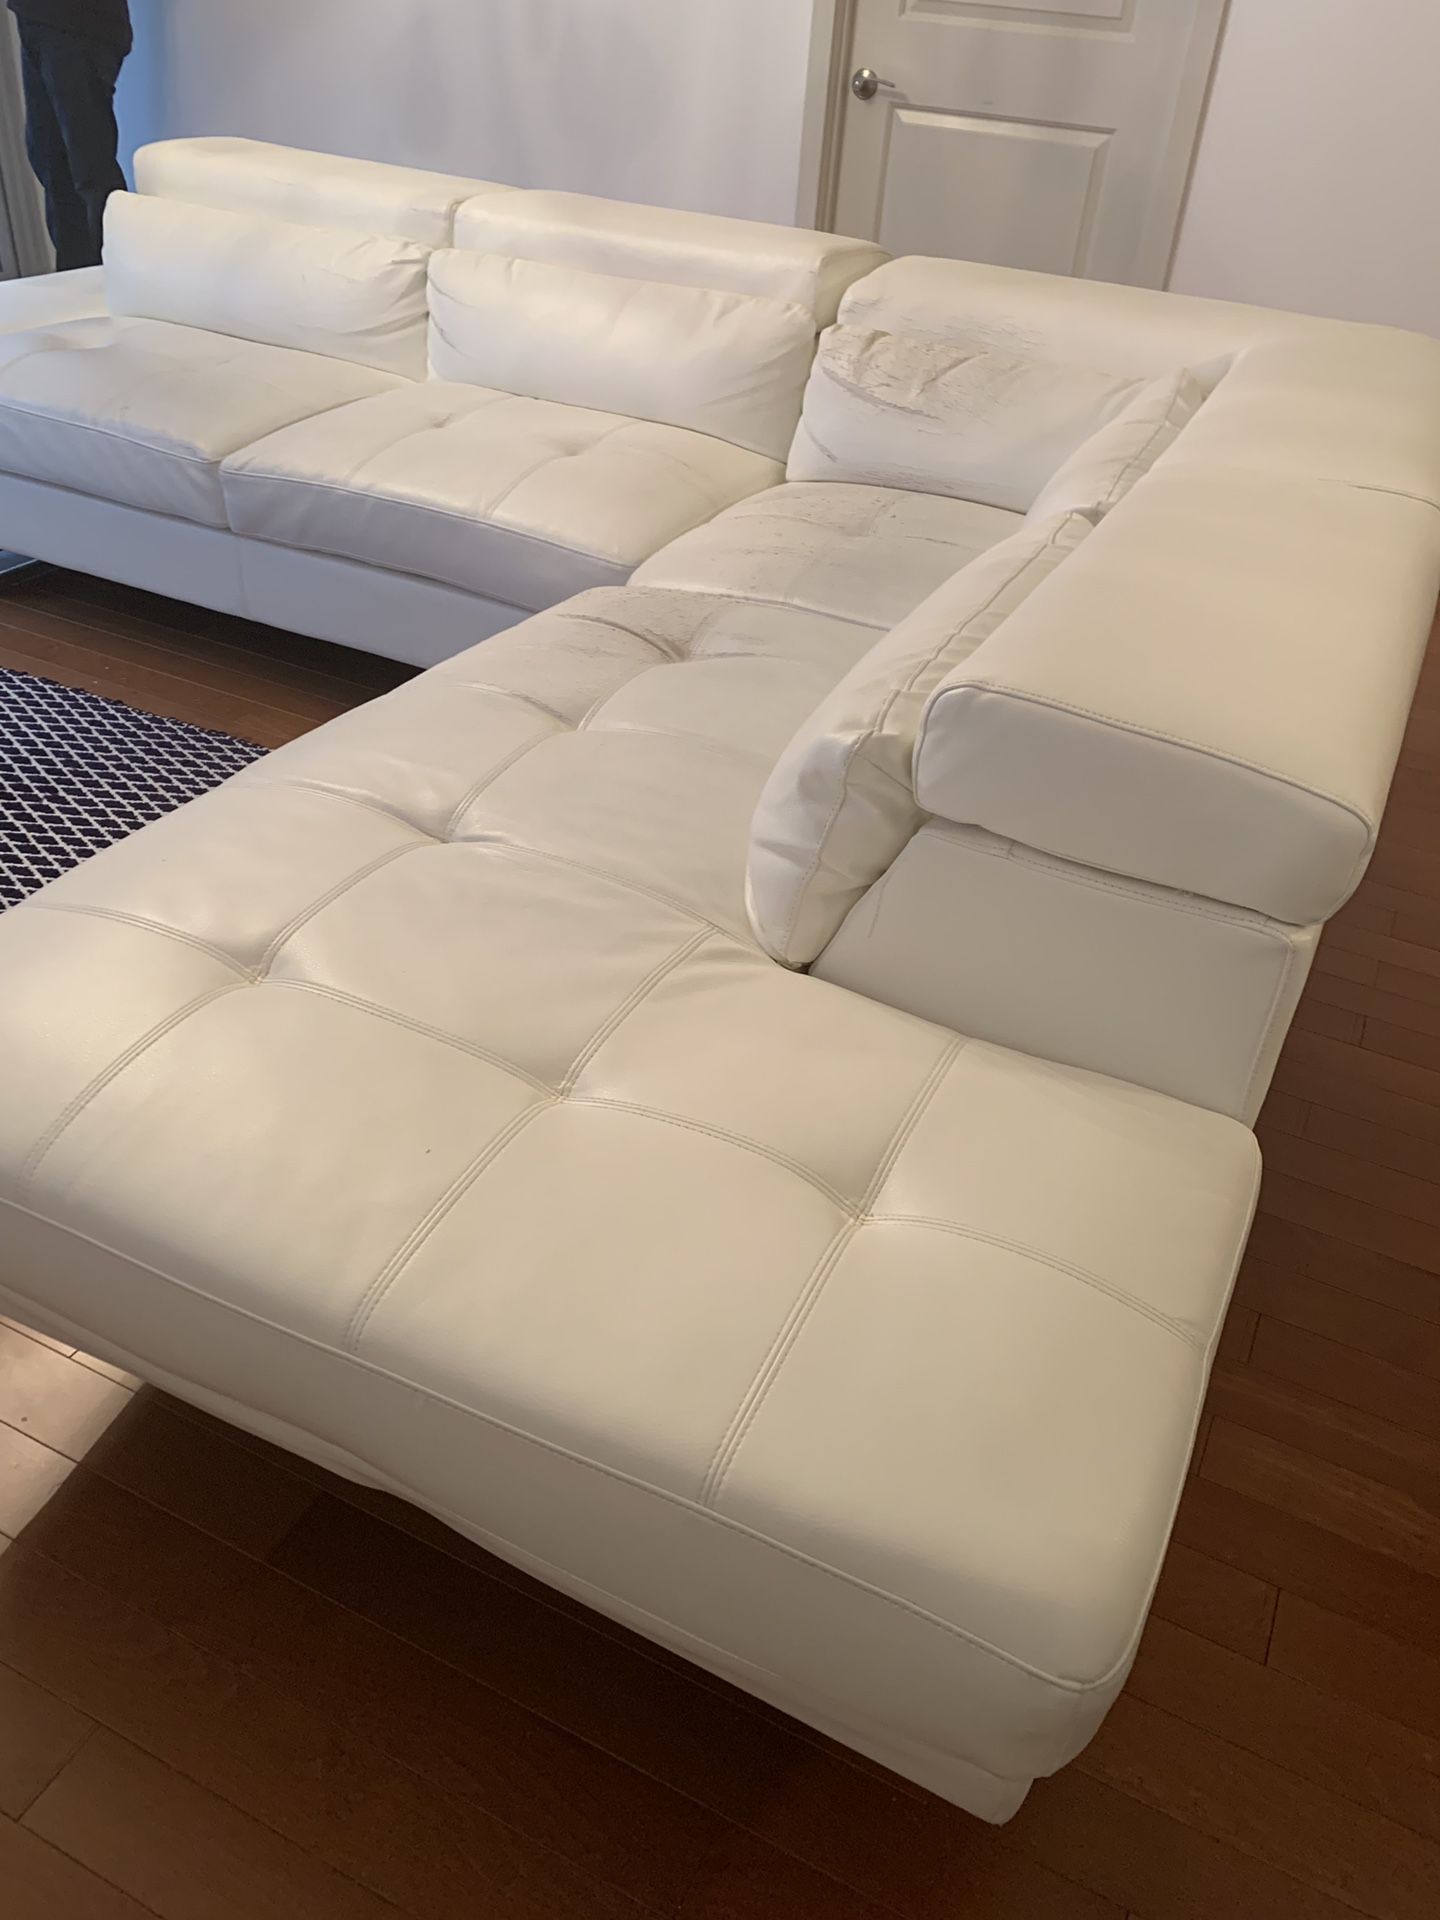 White leather look sectional sofa